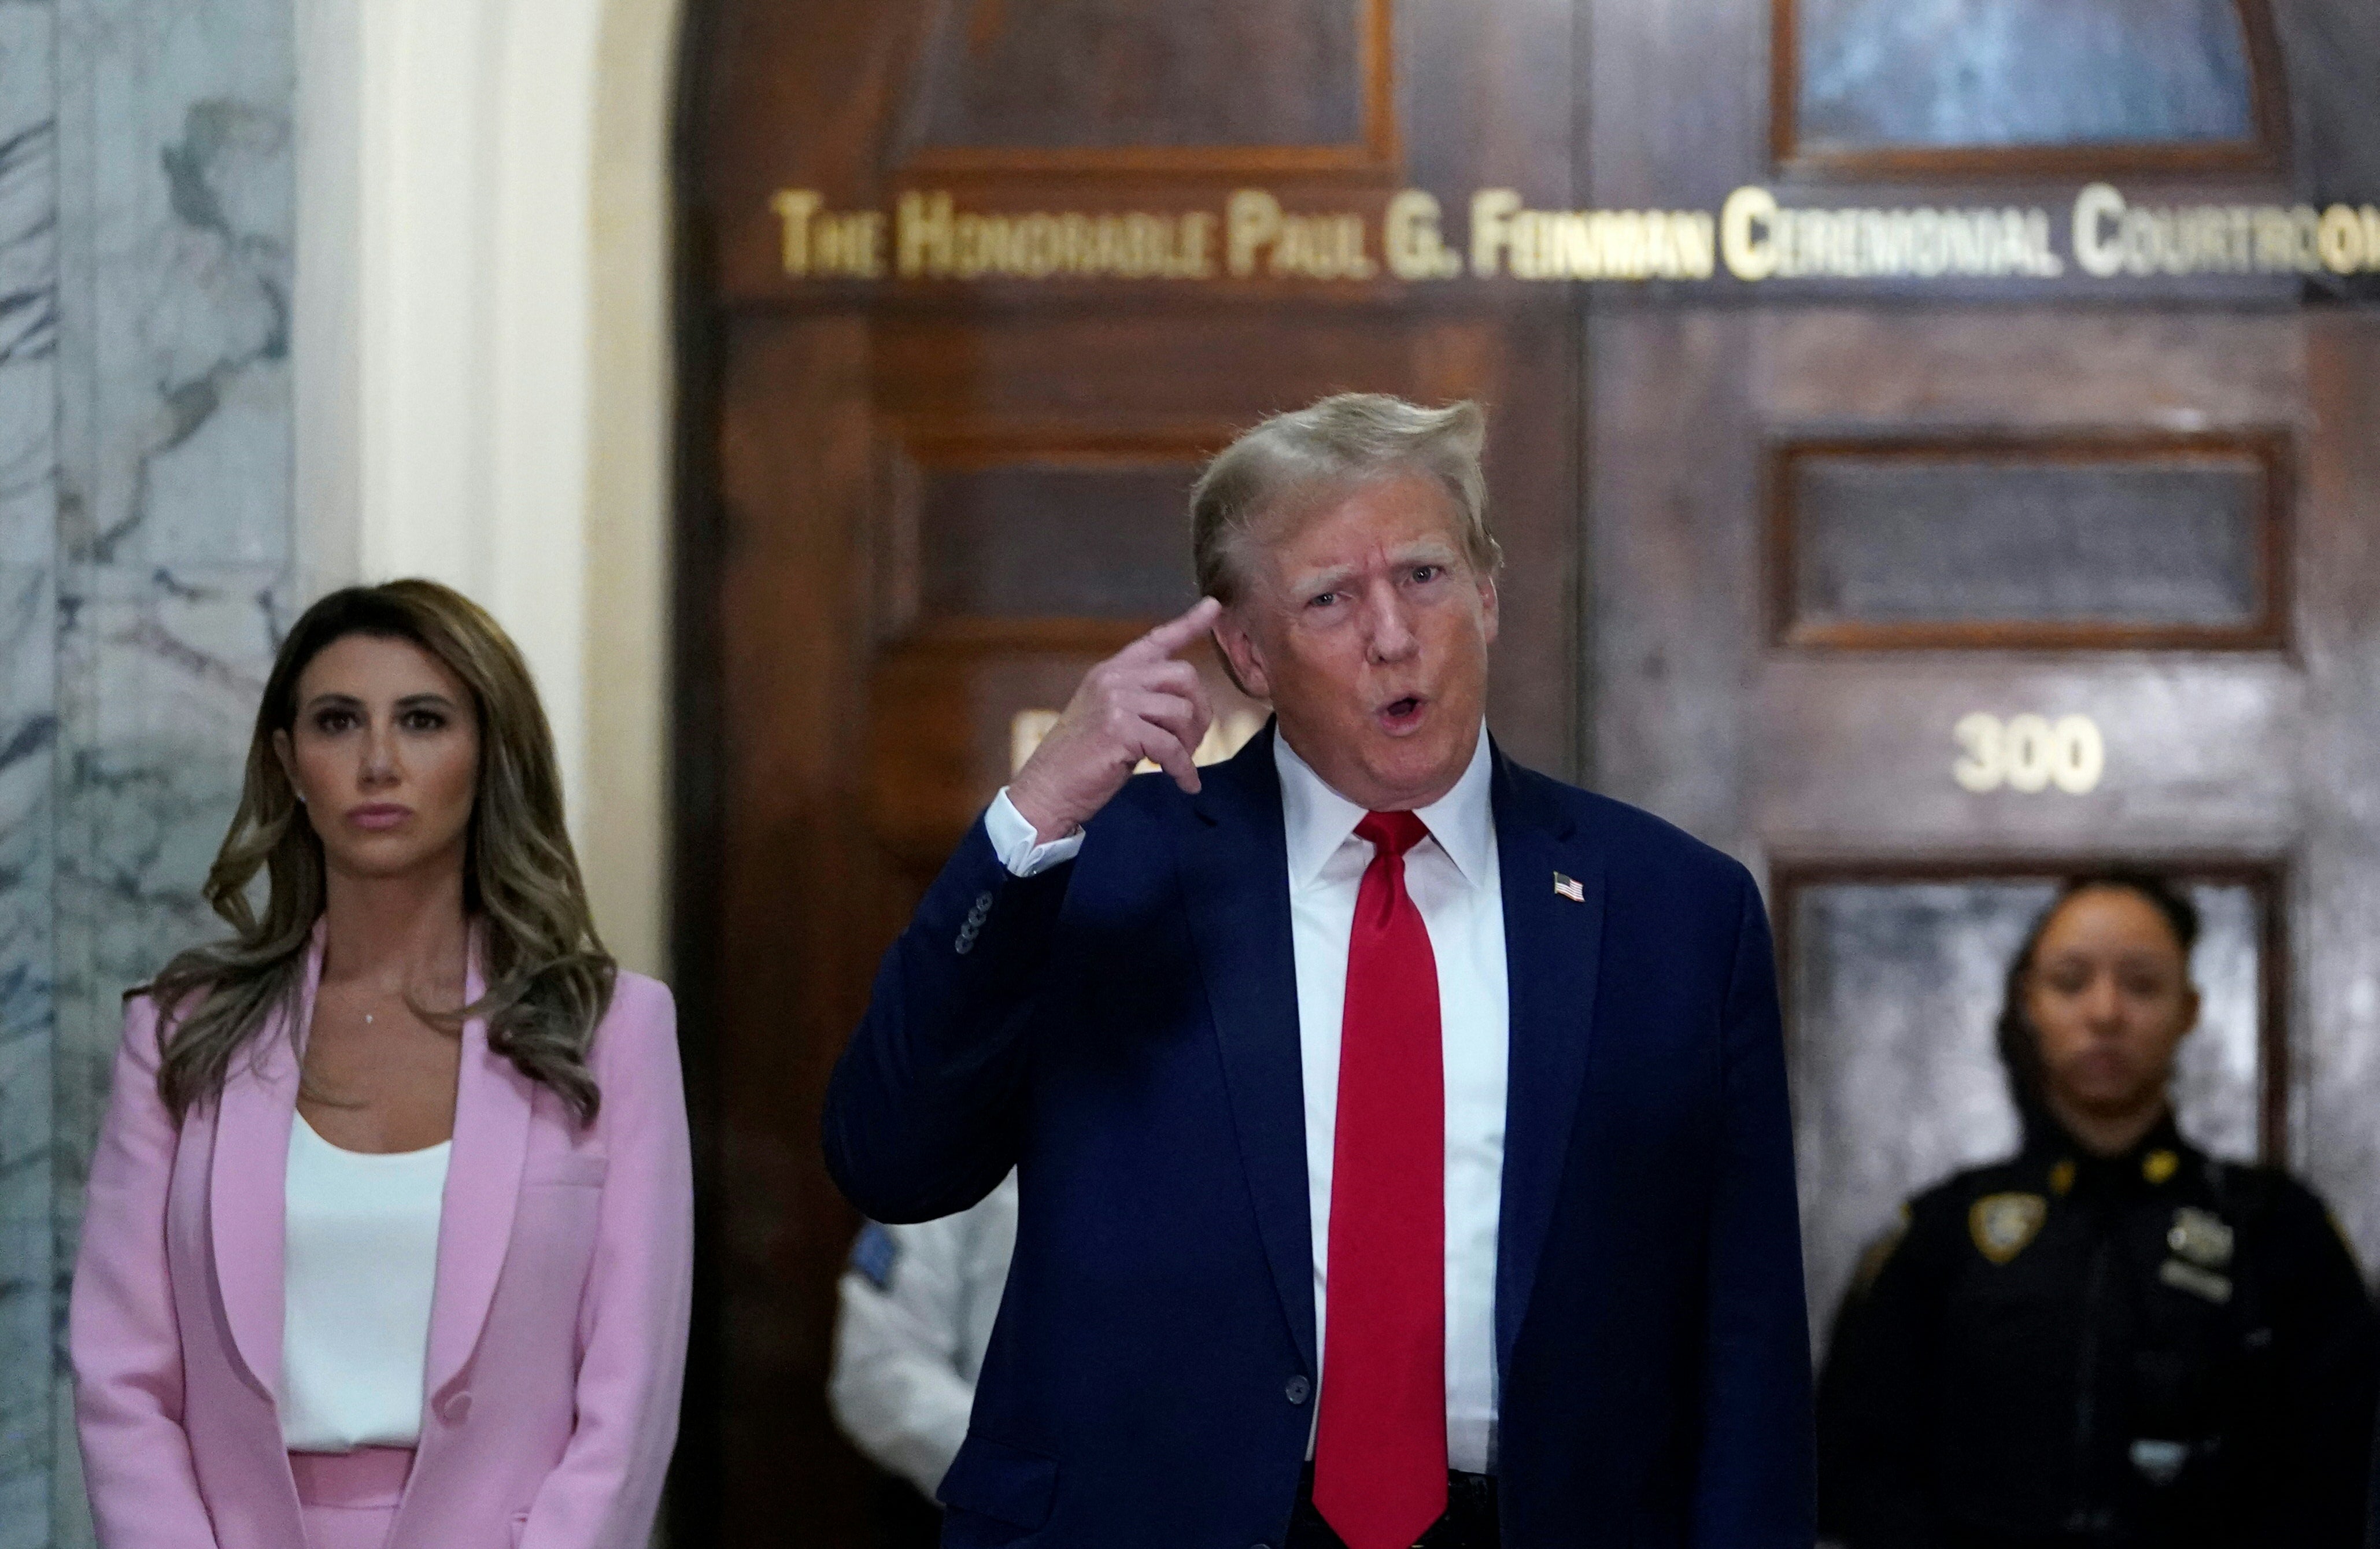 Donald Trump speaks to reporters outside a New York courtroom where the former president and his Trump Organisation are on trial for fraud allegations stemming from a multimillion-dollar lawsuit from the state’s attorney general